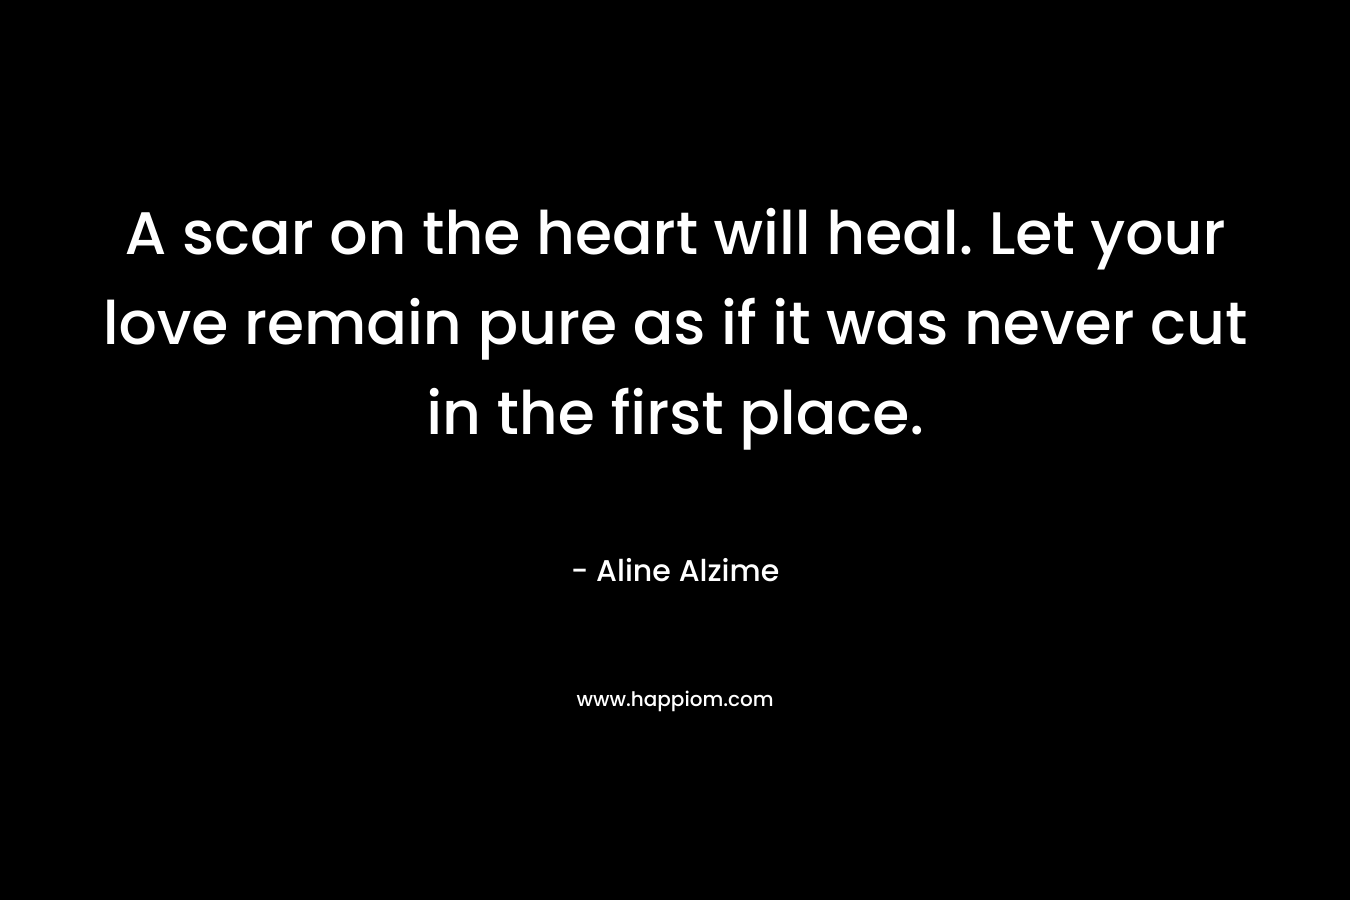 A scar on the heart will heal. Let your love remain pure as if it was never cut in the first place.